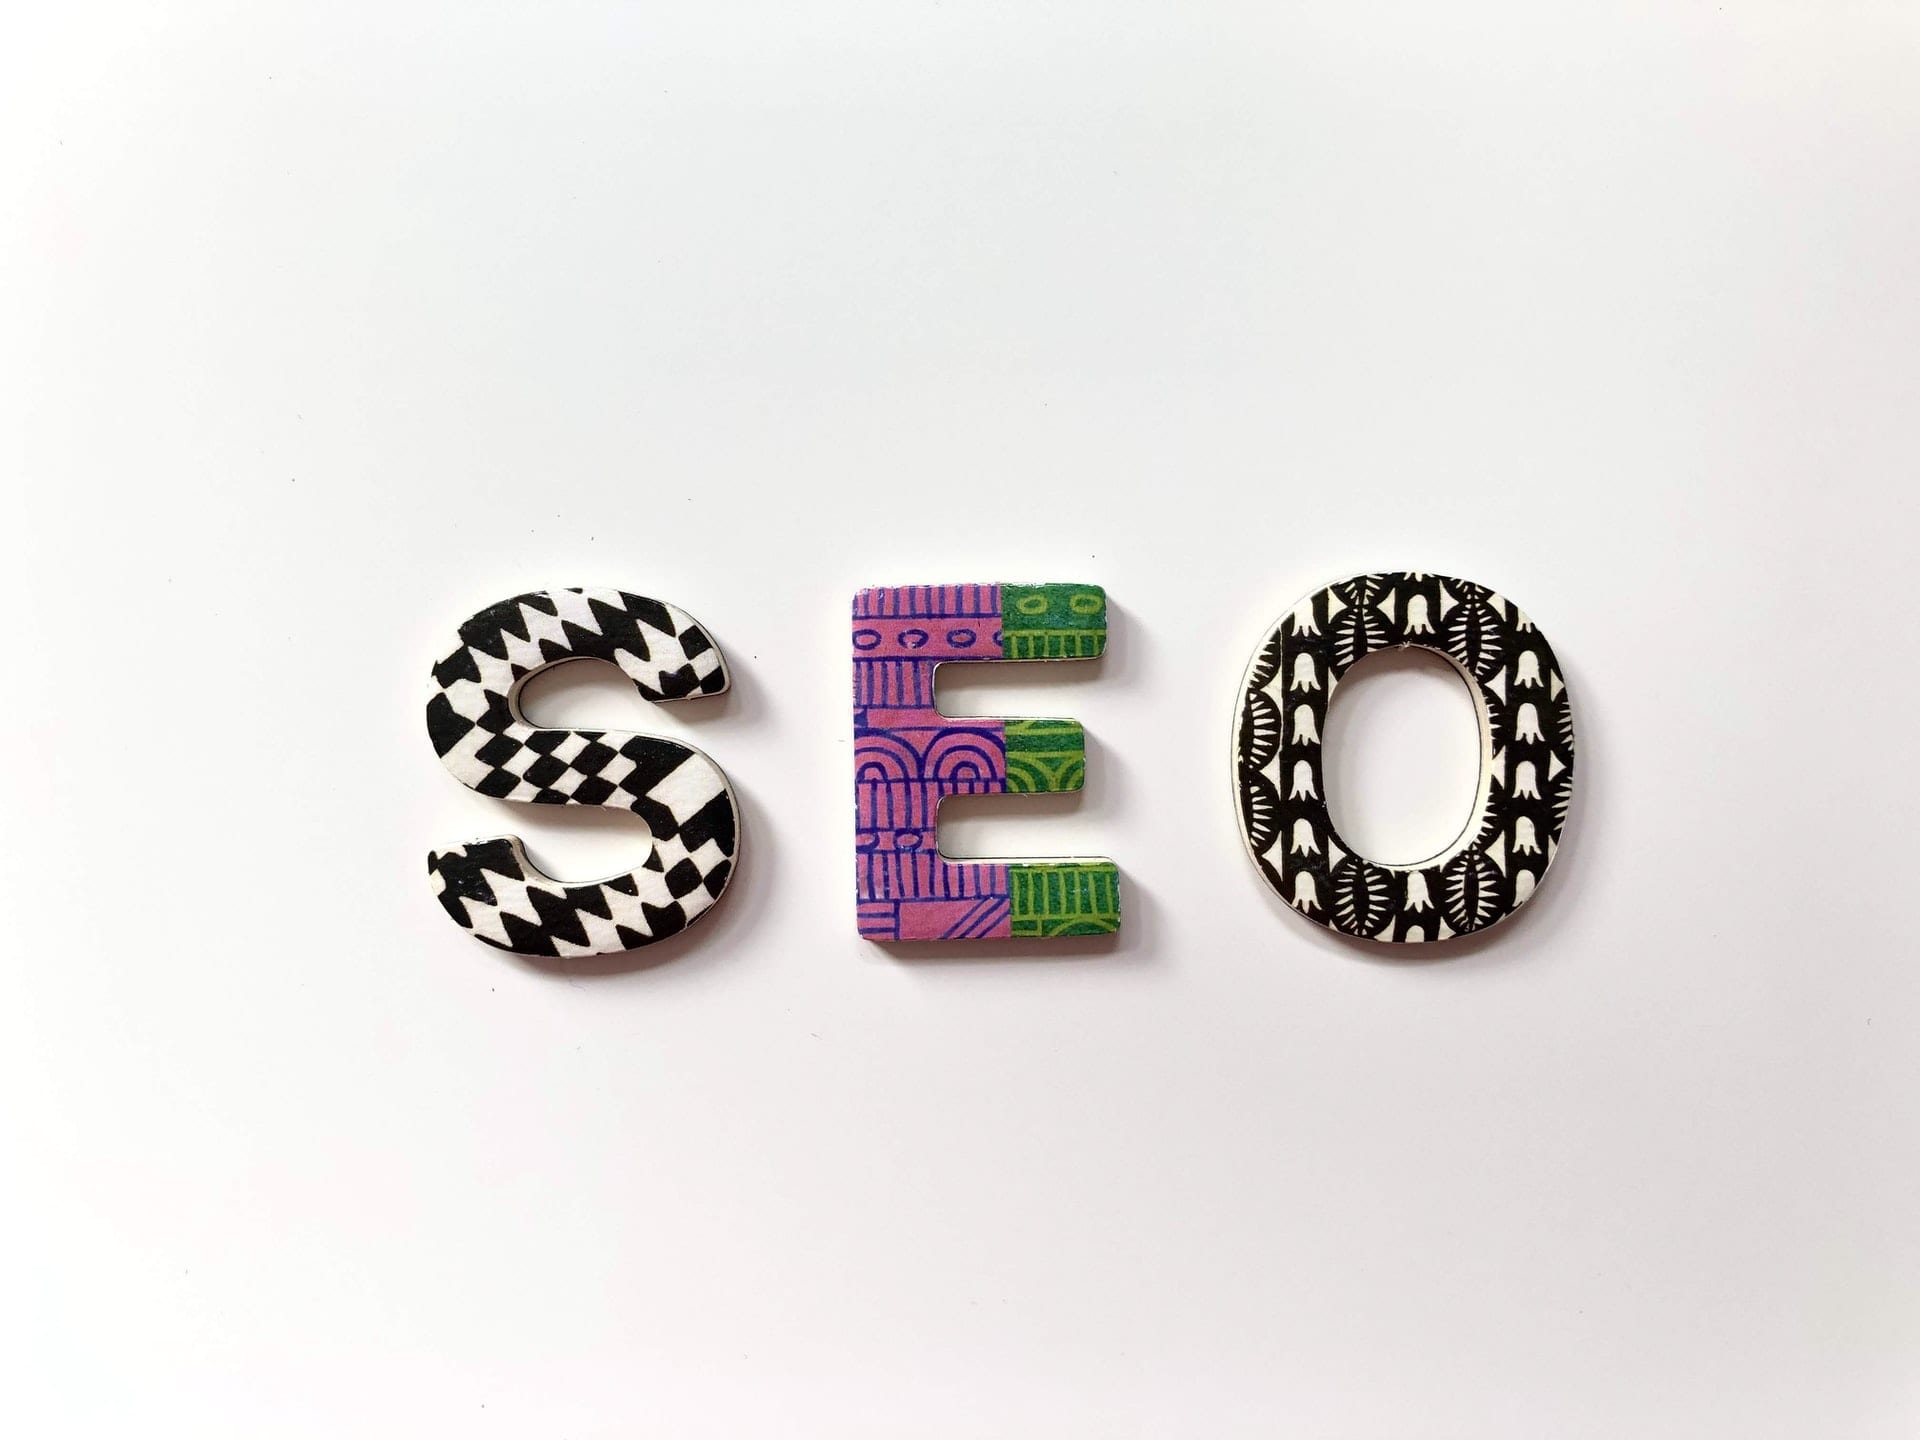 Do Blogs Really Help With SEO?